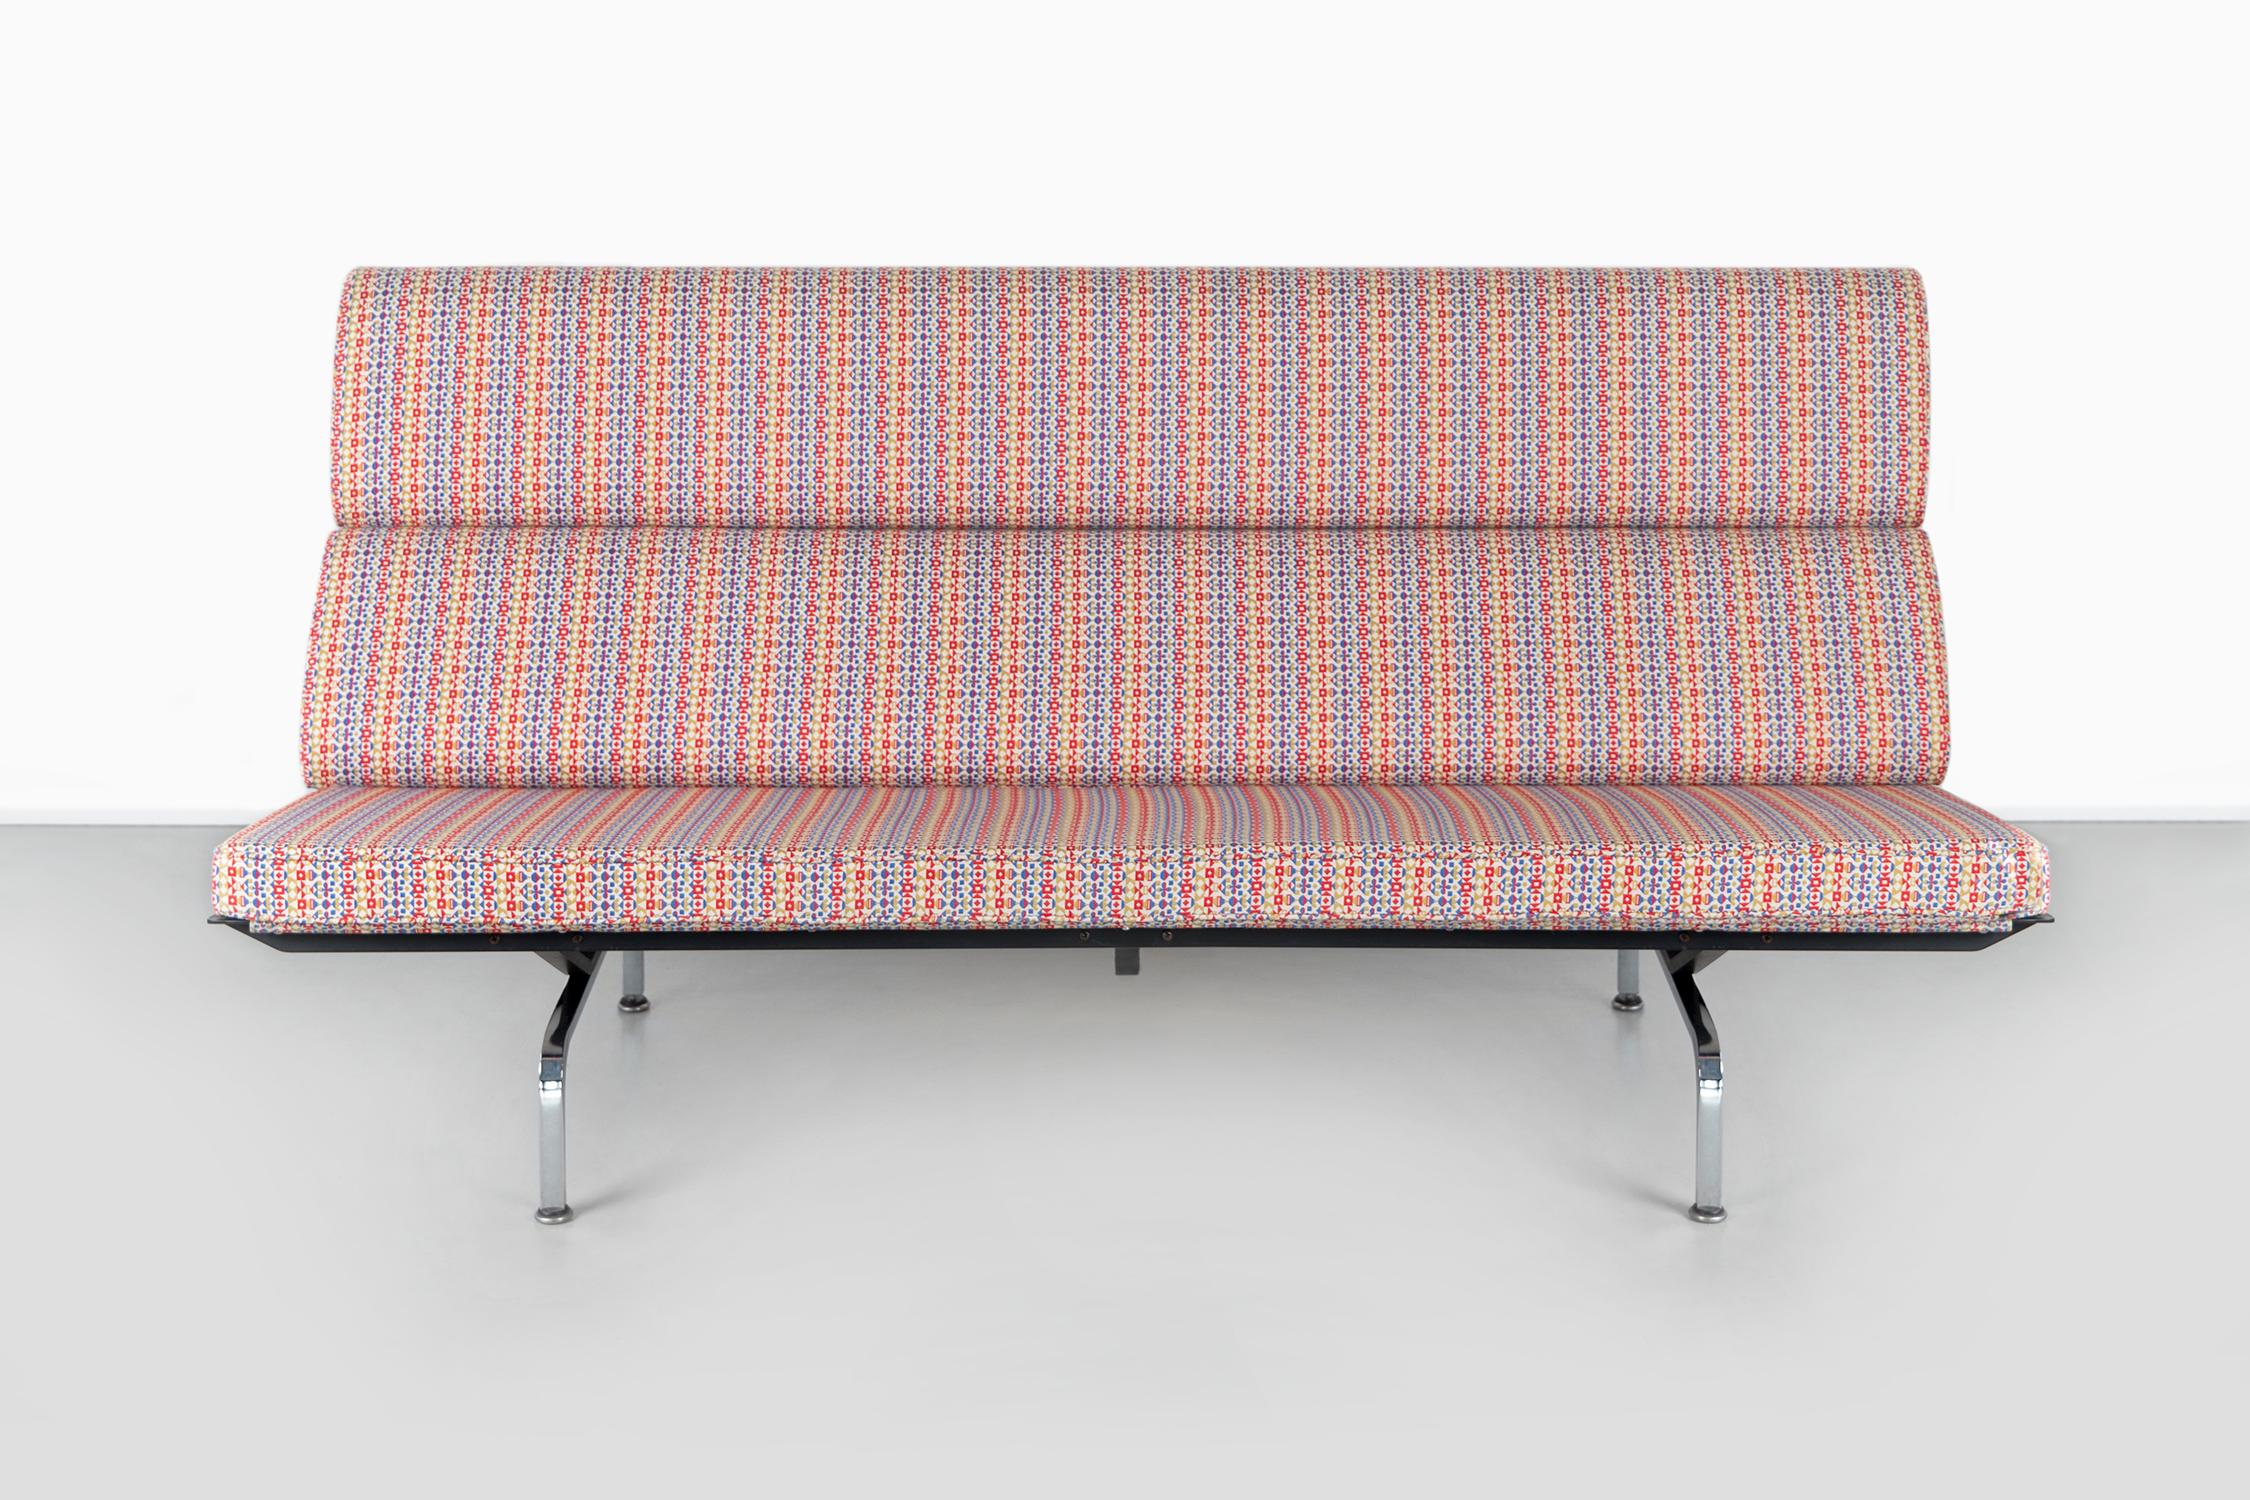 Eames compact sofa

designed by Charles and Ray Eames for Herman Miller

USA, circa 1950s

Metal and upholstered in Arabesque fabric by Alexander Girard

Measures: 36” H x 71 ½” W x 29” D x seat 16 ¼” H.

 